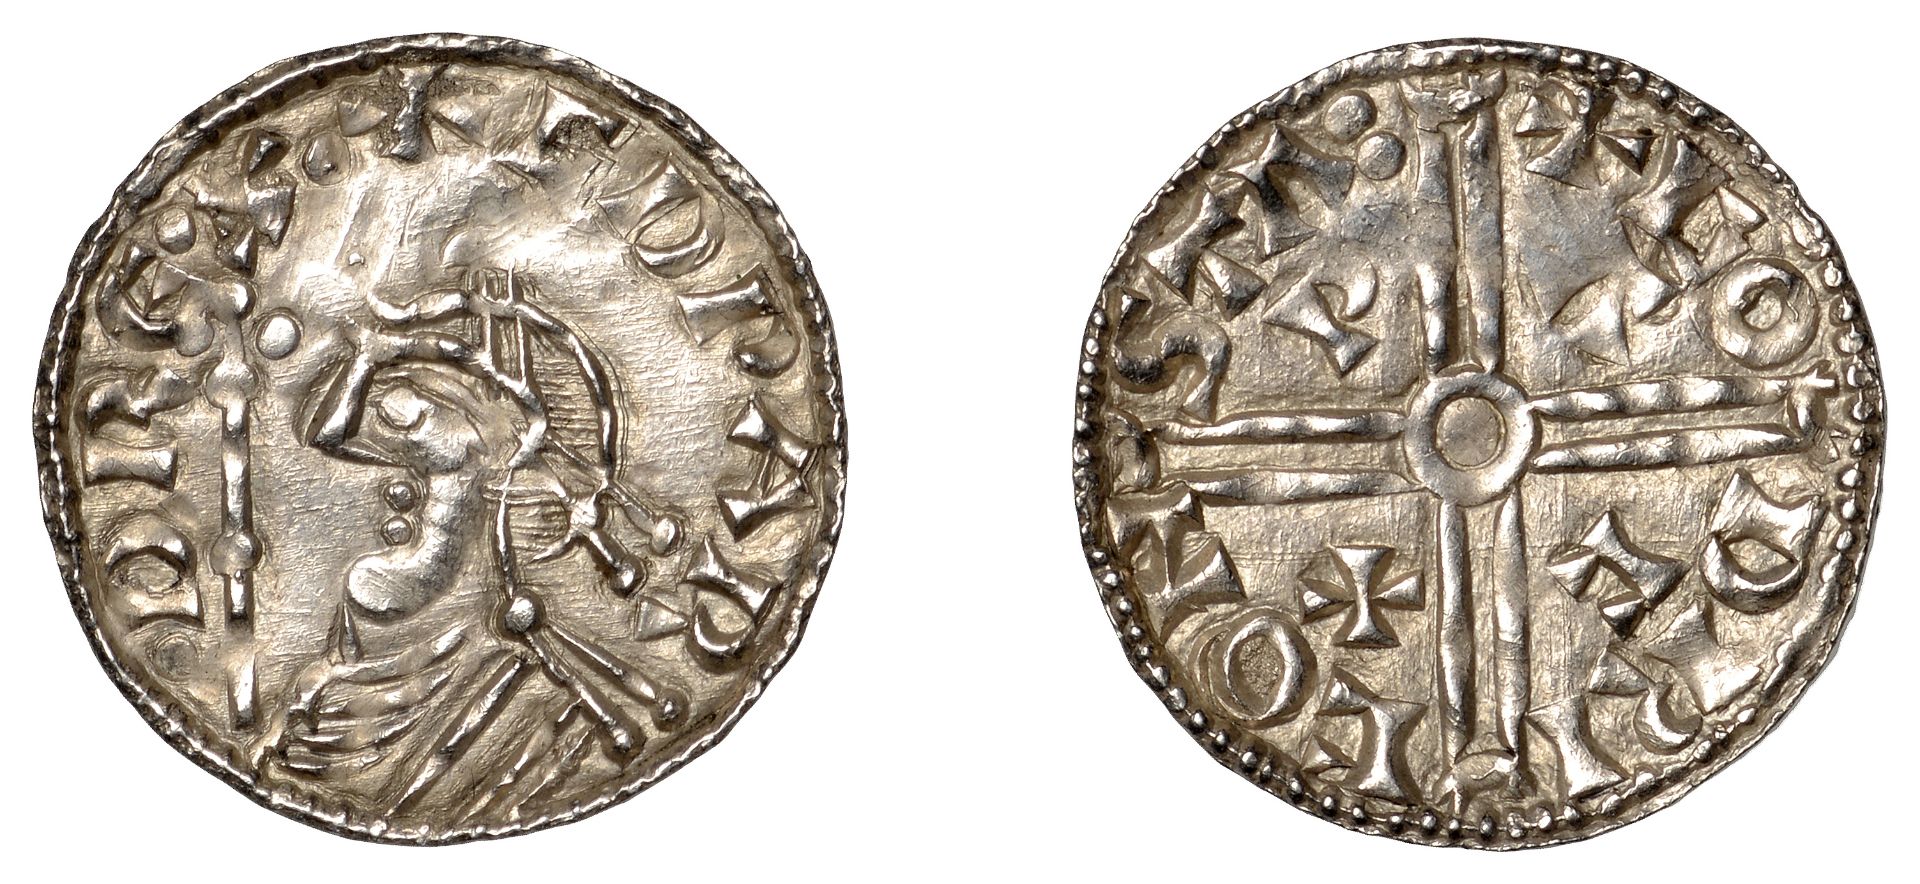 Edward the Confessor (1042-1066), Penny, PACX type, Stamford, Godric, godric on sta:, e in r...